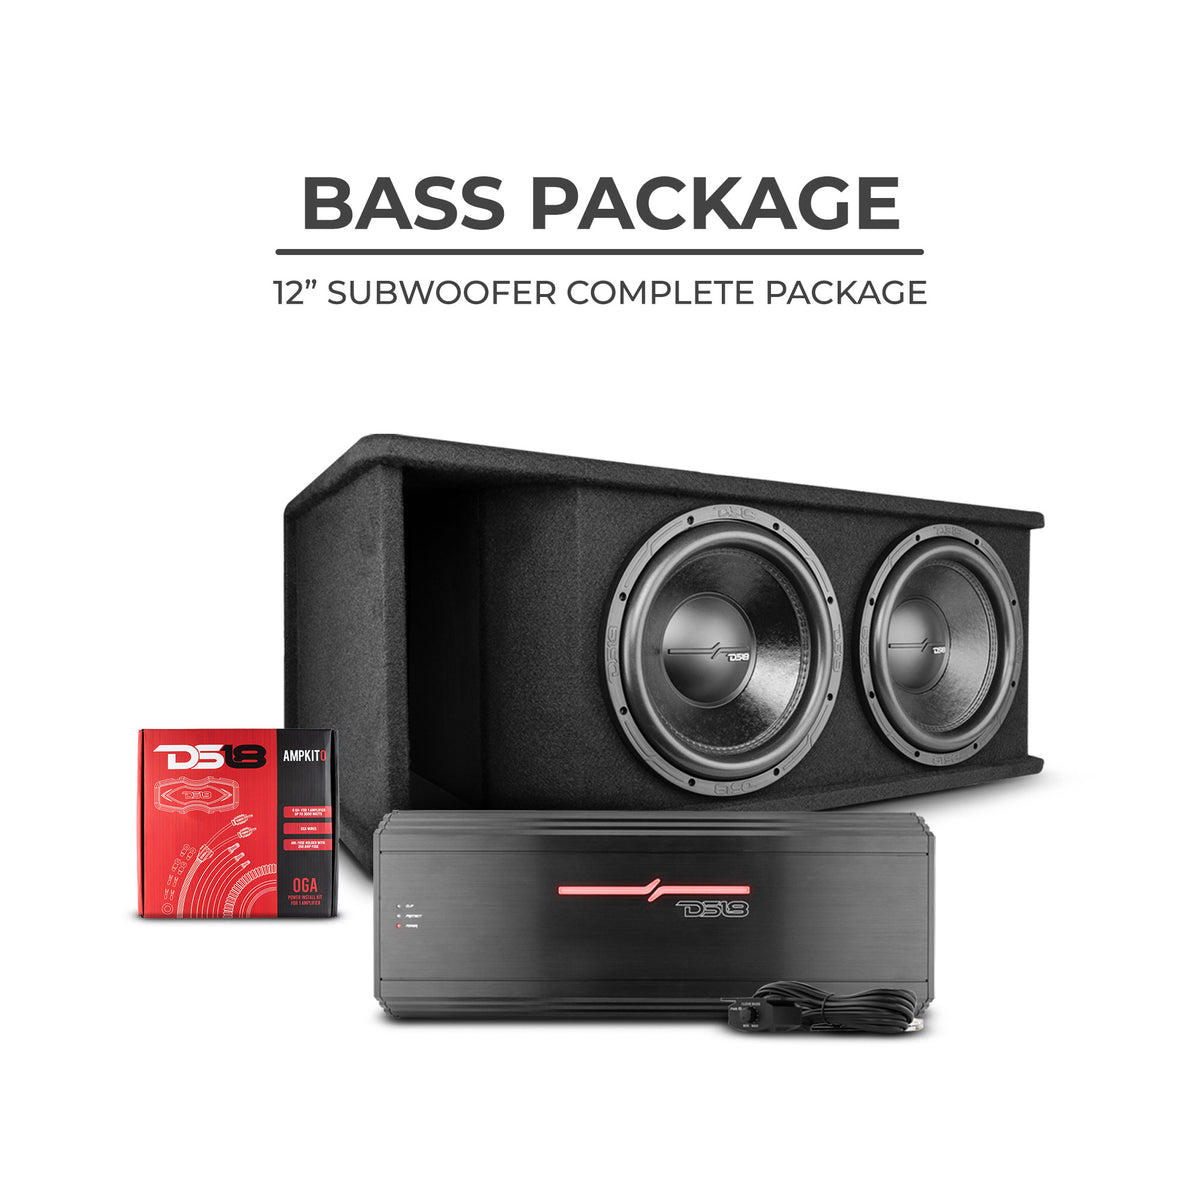 DS18 ZR212LD-PKG Bass Package 2 x ZR12D4 12" Subwoofers In a Ported Box 3200 Watts with ZR2000.1D Class D 1-Channel Amplifier, and Ampkit0